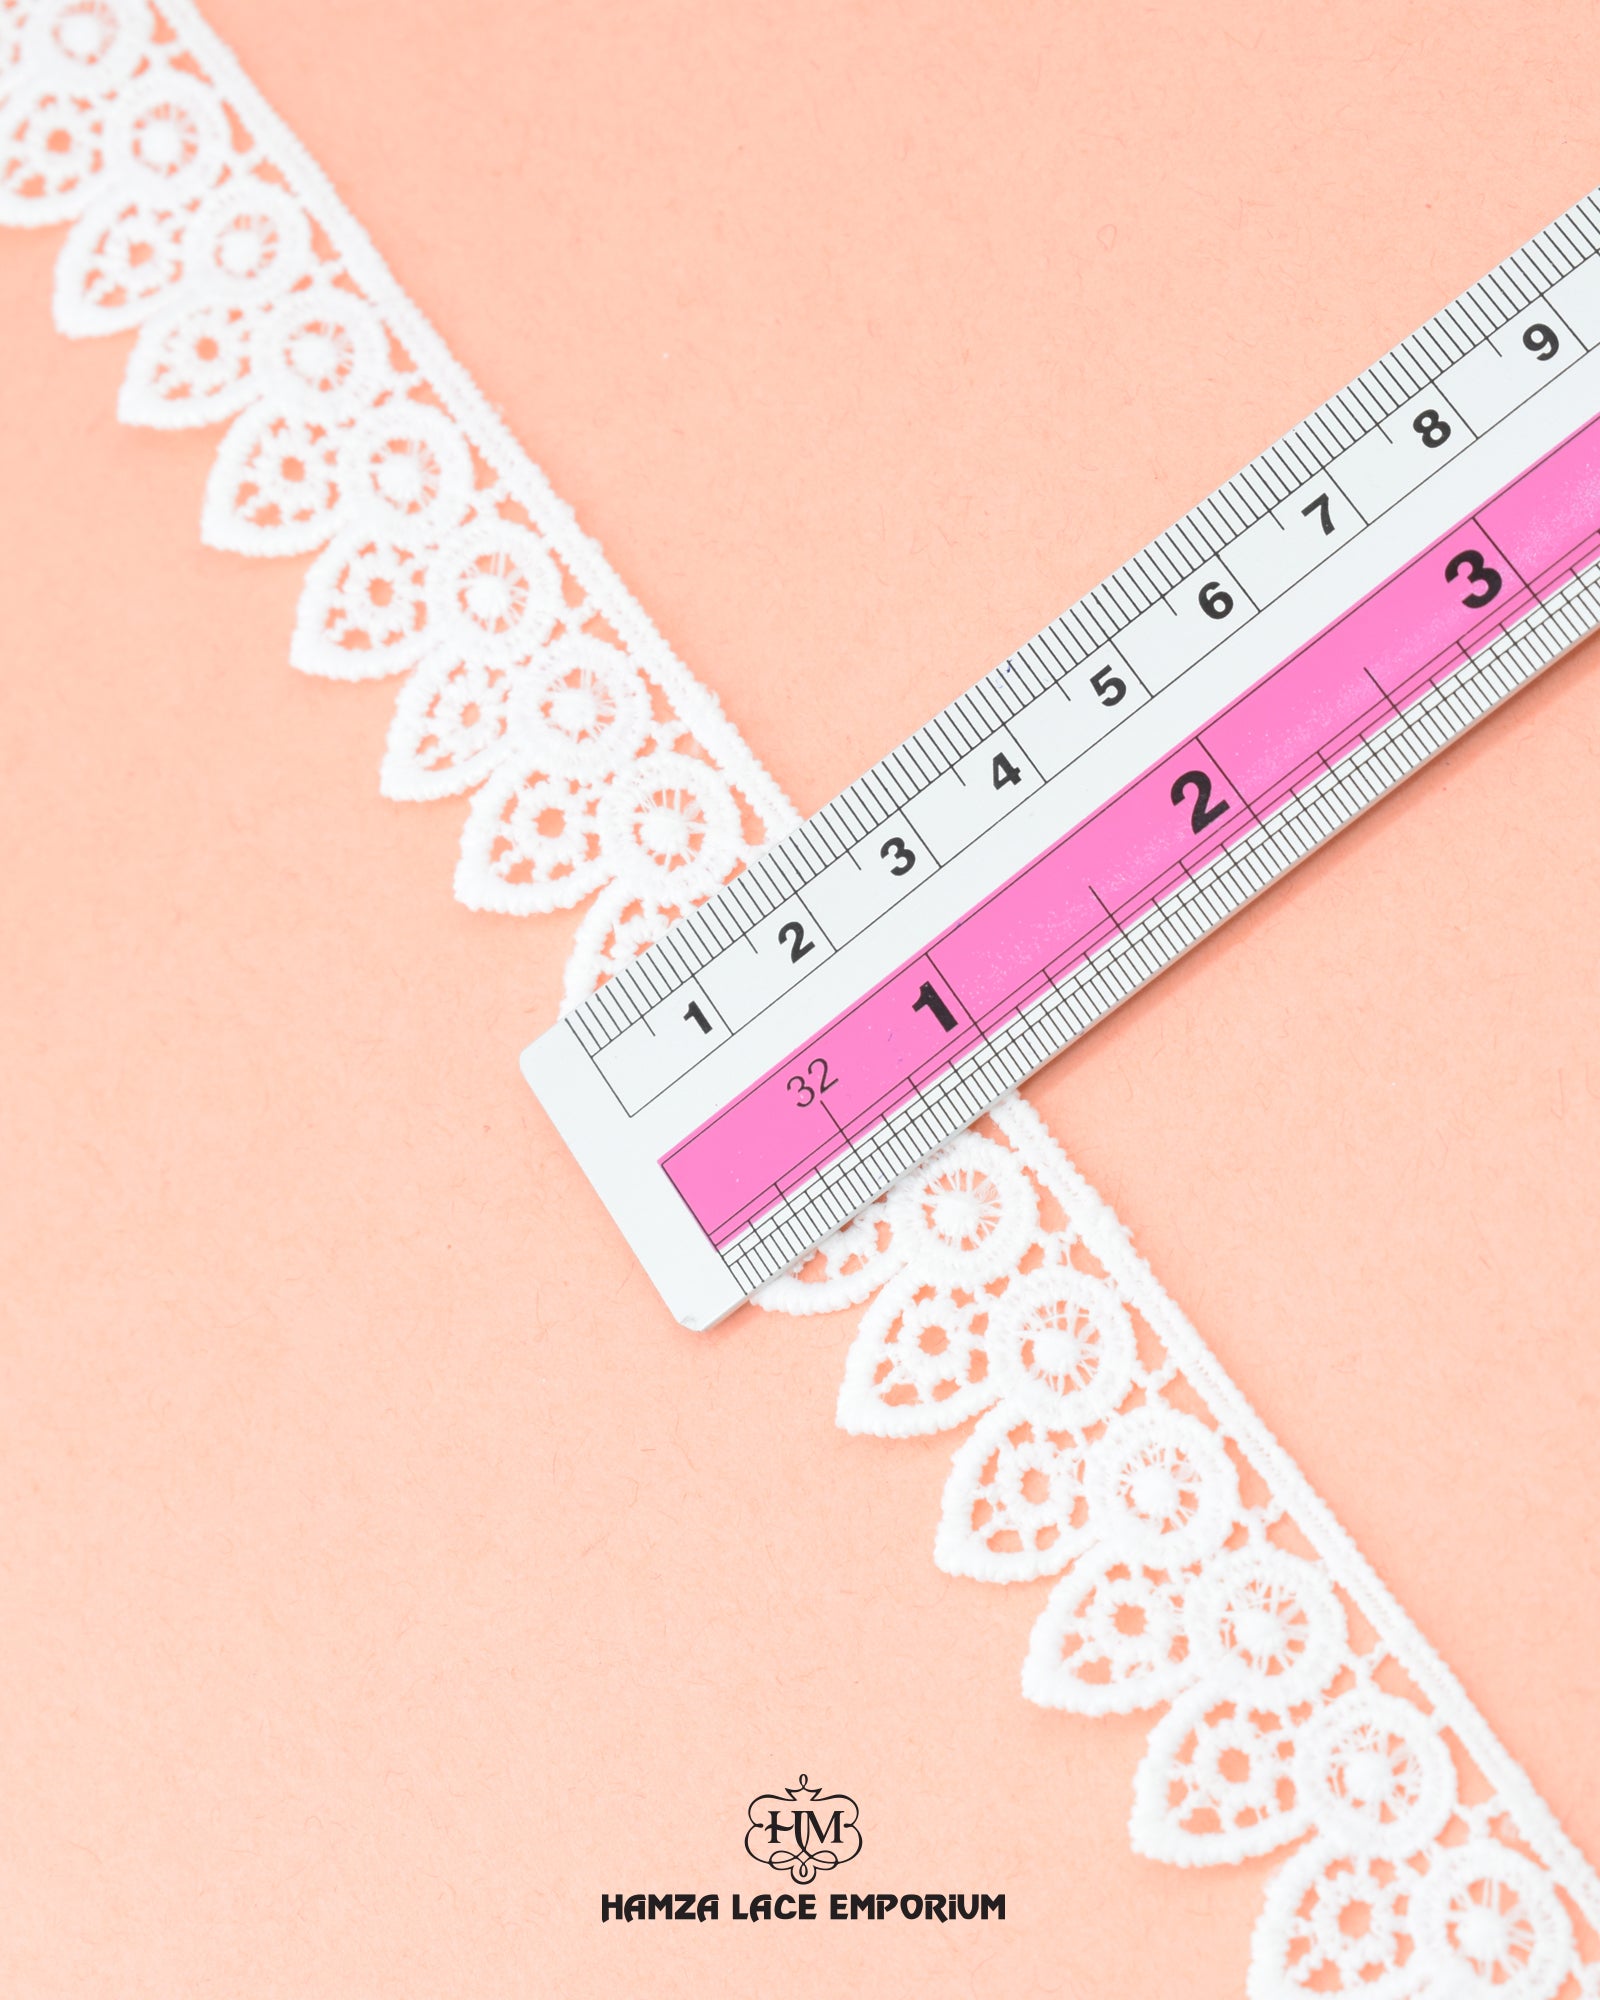 Size of the 'Edging Lace 23509' is shown as '1' inch with the help of a ruler